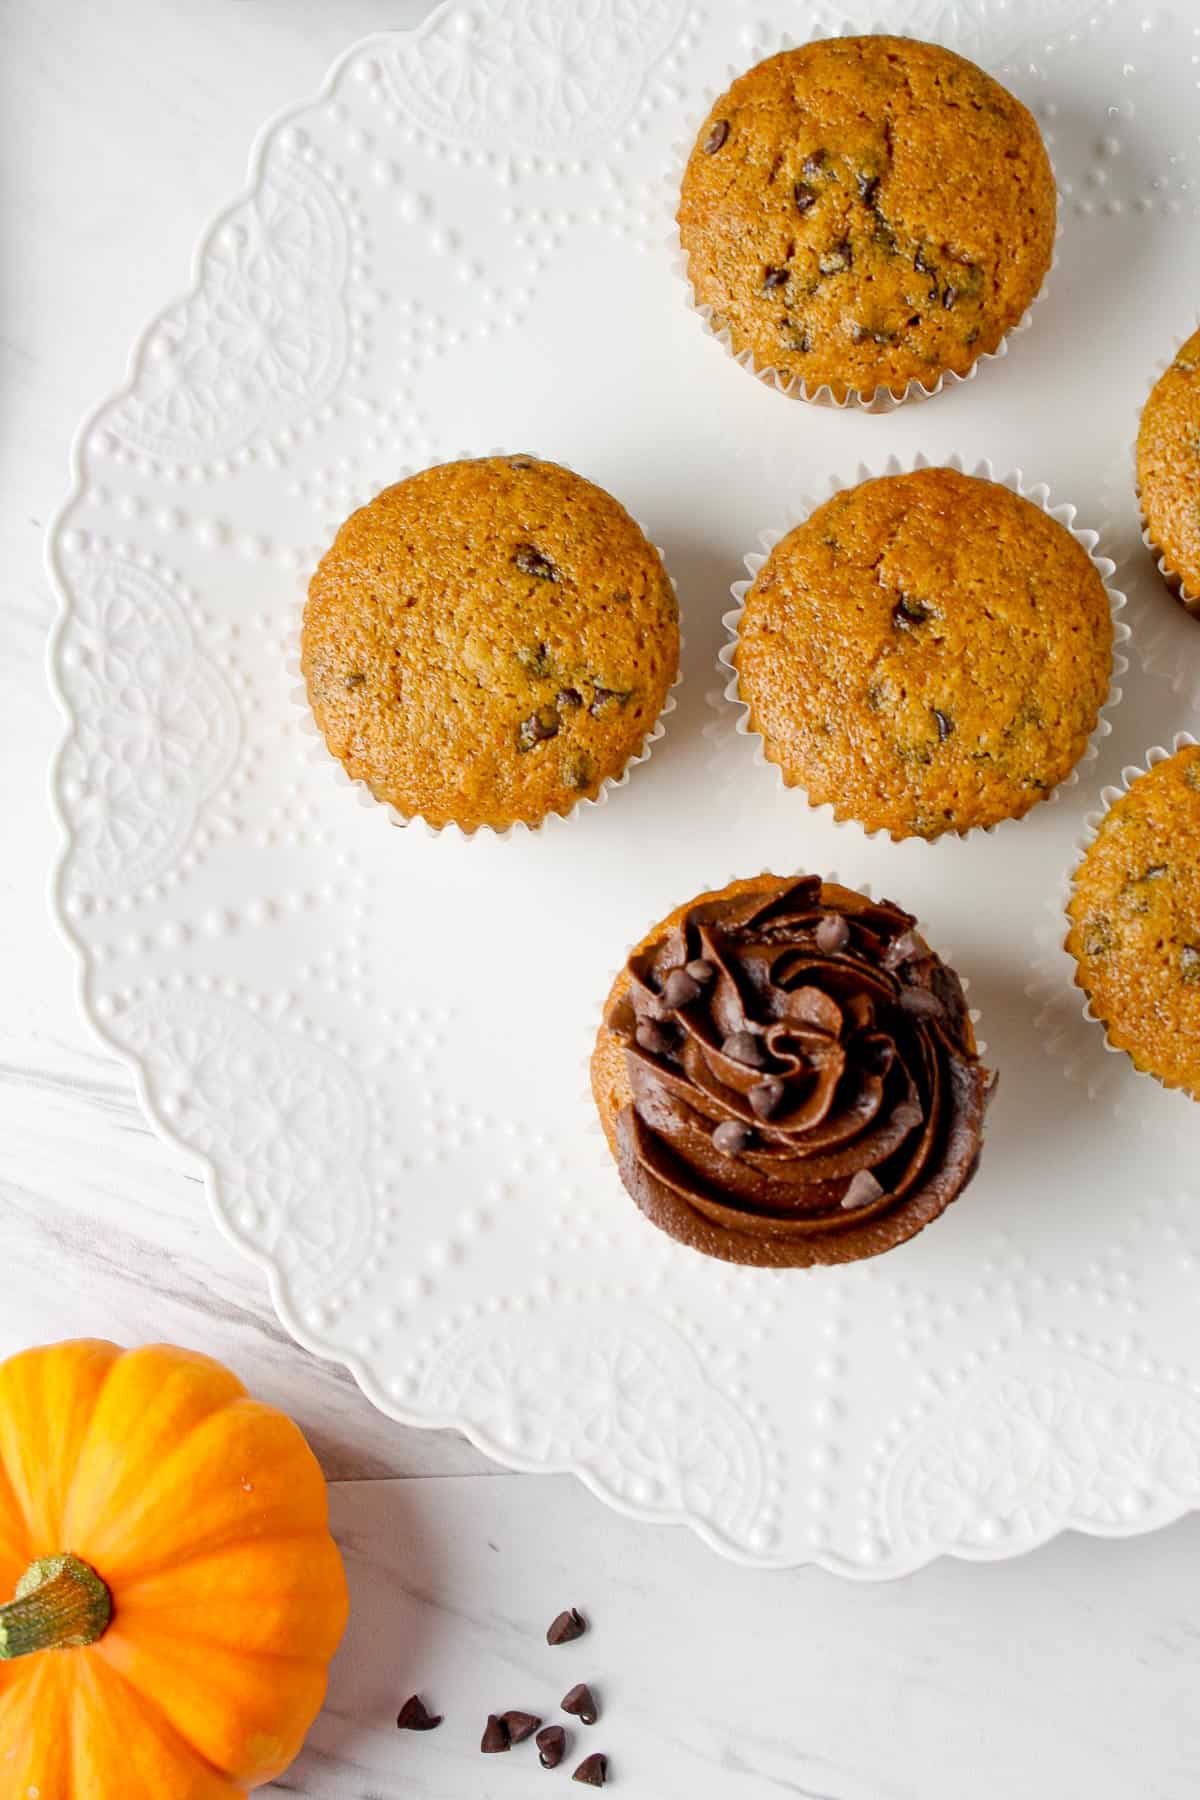 Gluten Free Pumpkin Cupcakes with Chocolate Frosting | Hungry Foodie